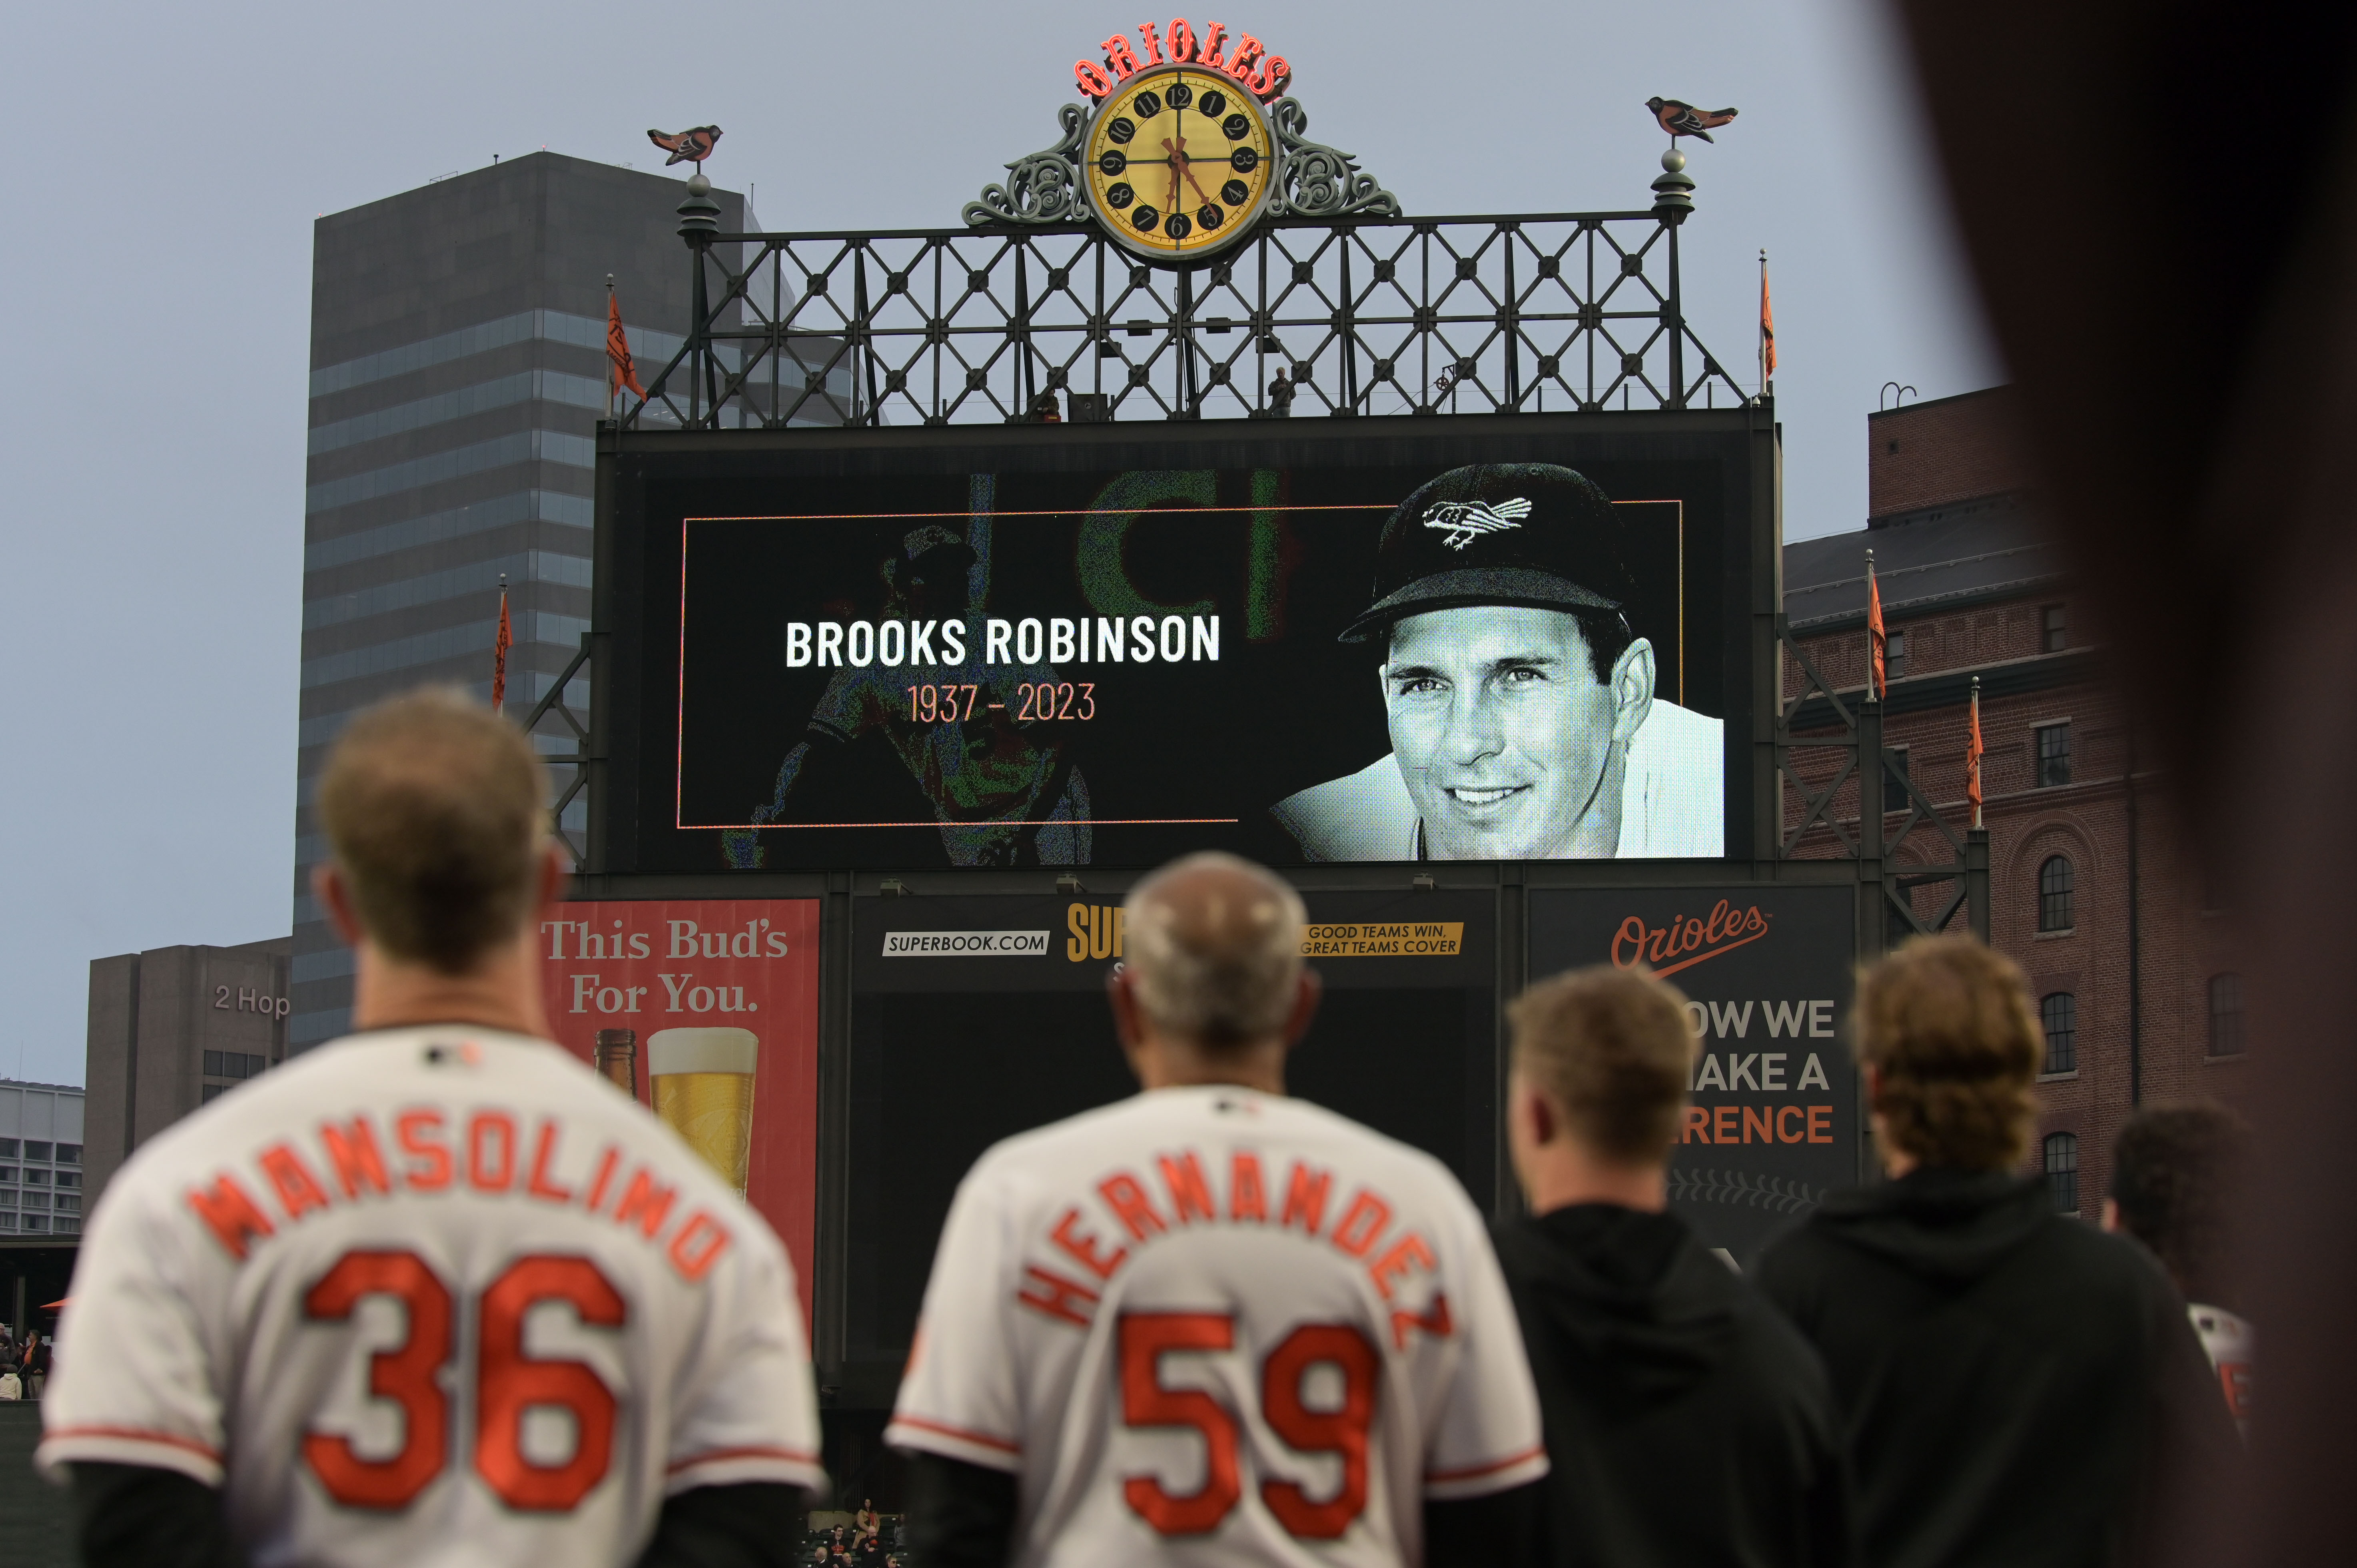 Baltimore Orioles to Wear Patch Honoring Brooks Robinson